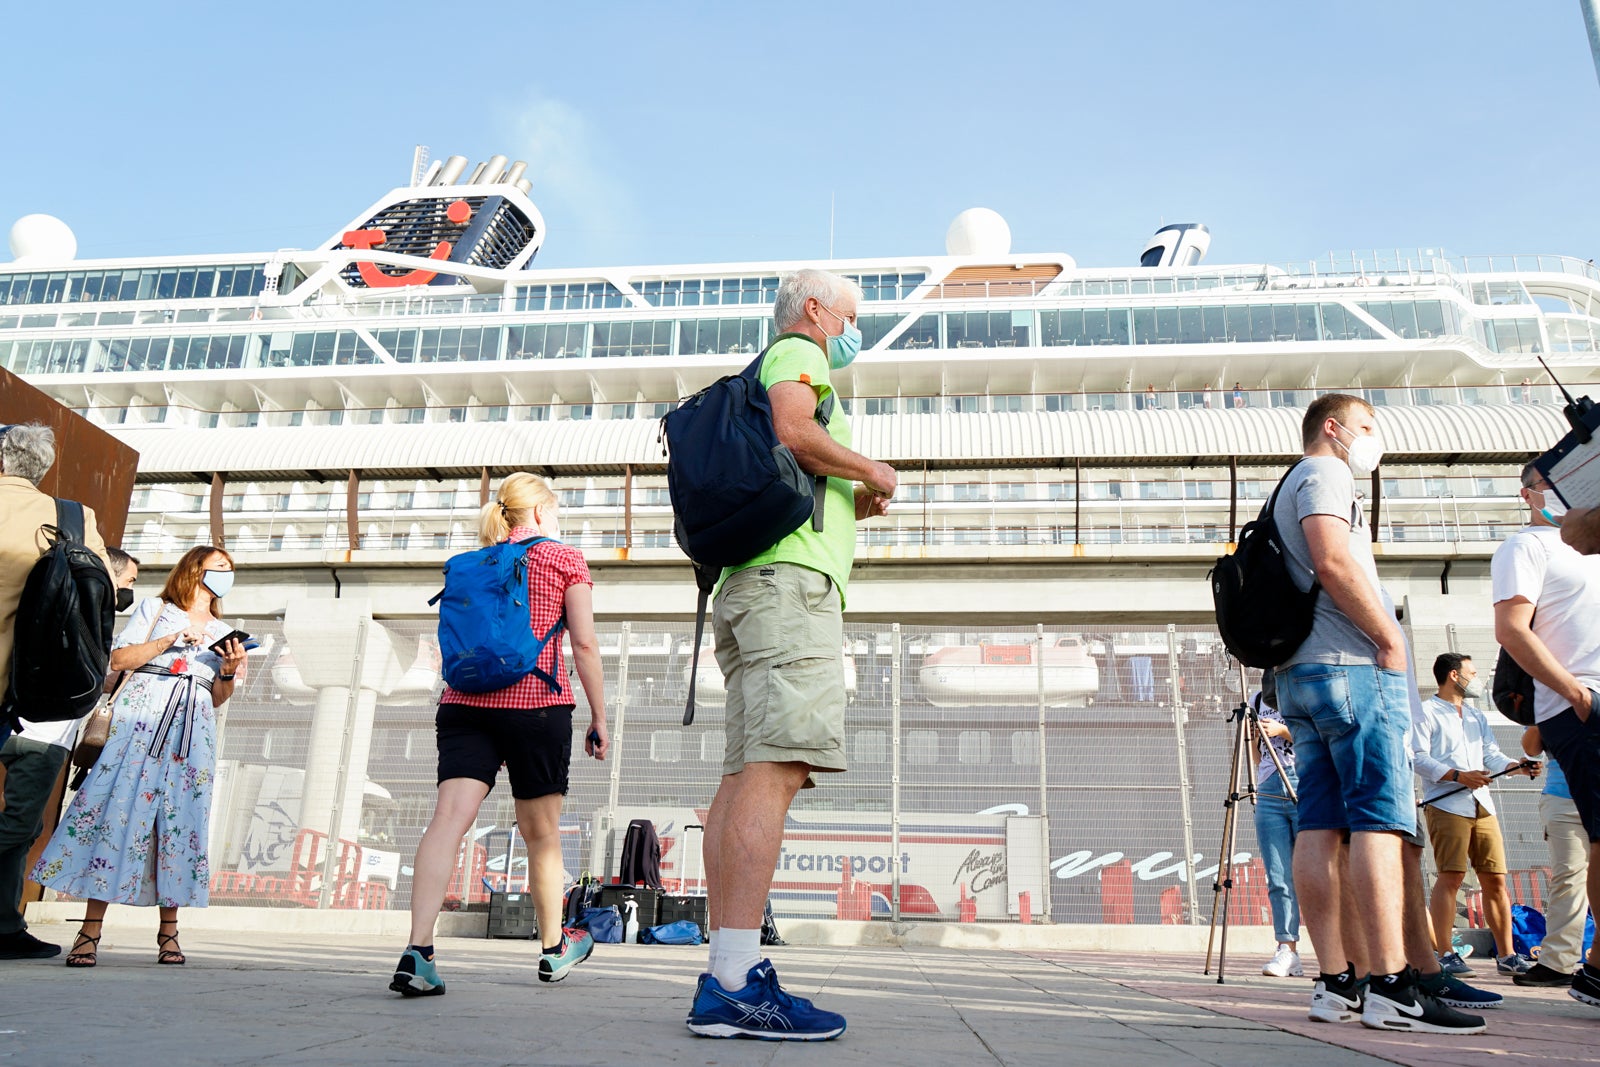 German tourists seen arriving to Malaga. Mein Schiff 2 is